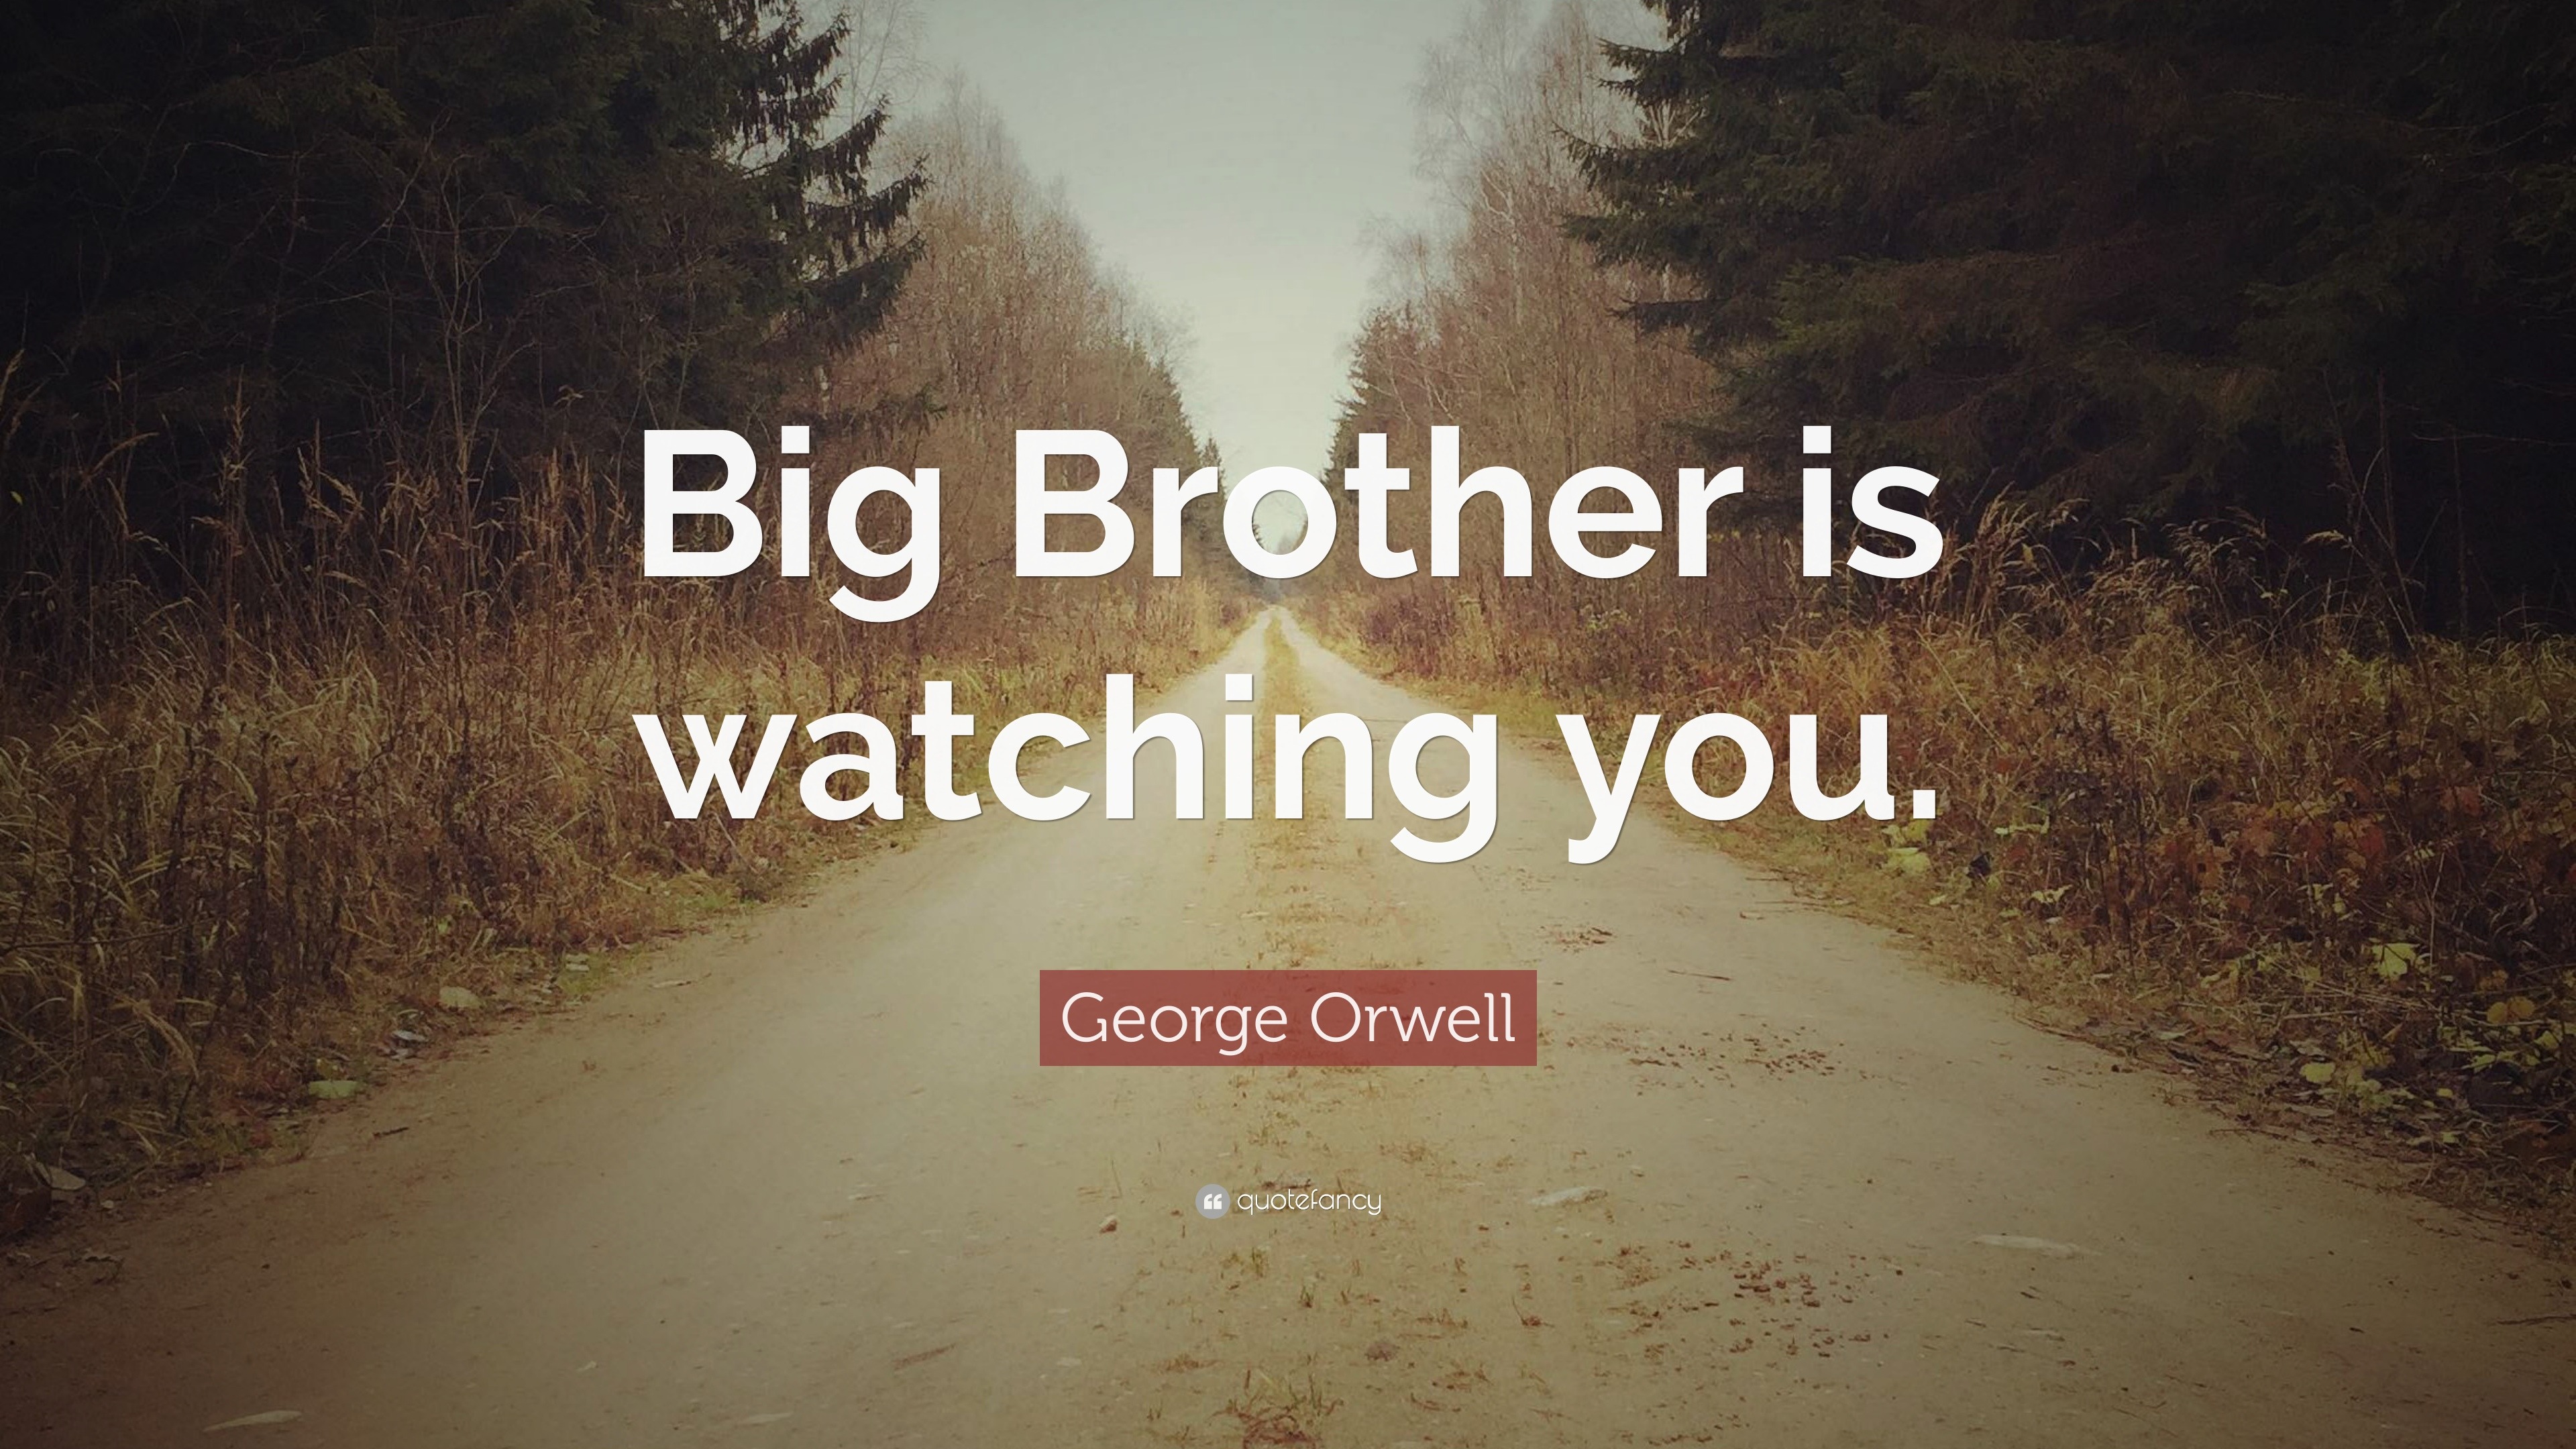 George Orwell Quote: “Big Brother is watching you.” (14 wallpapers